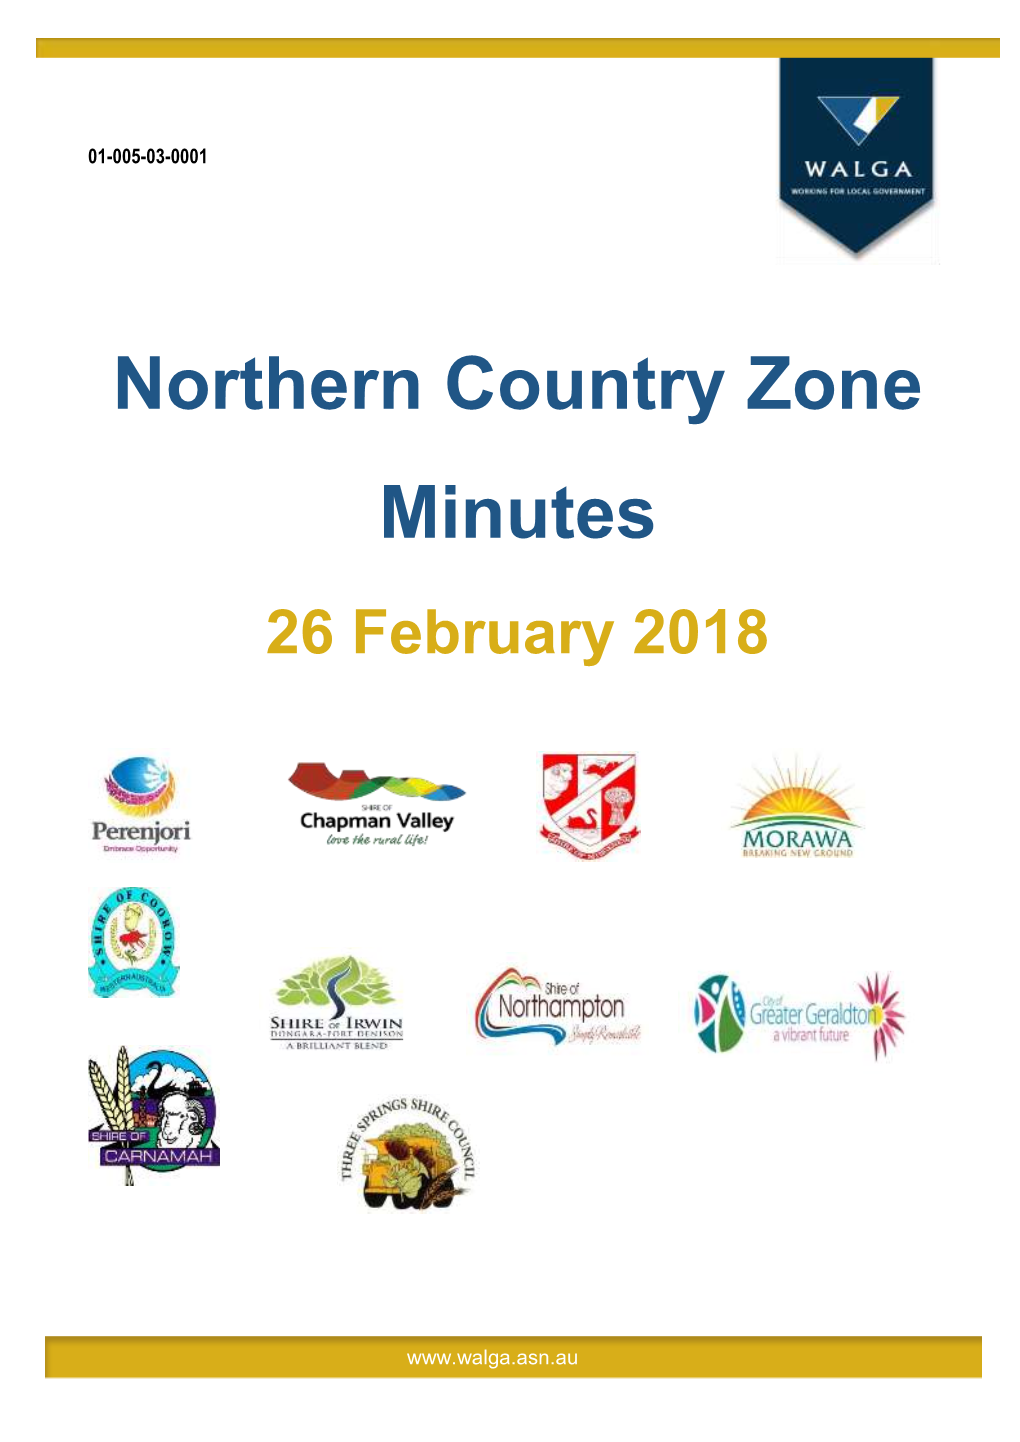 Northern Country Zone Minutes